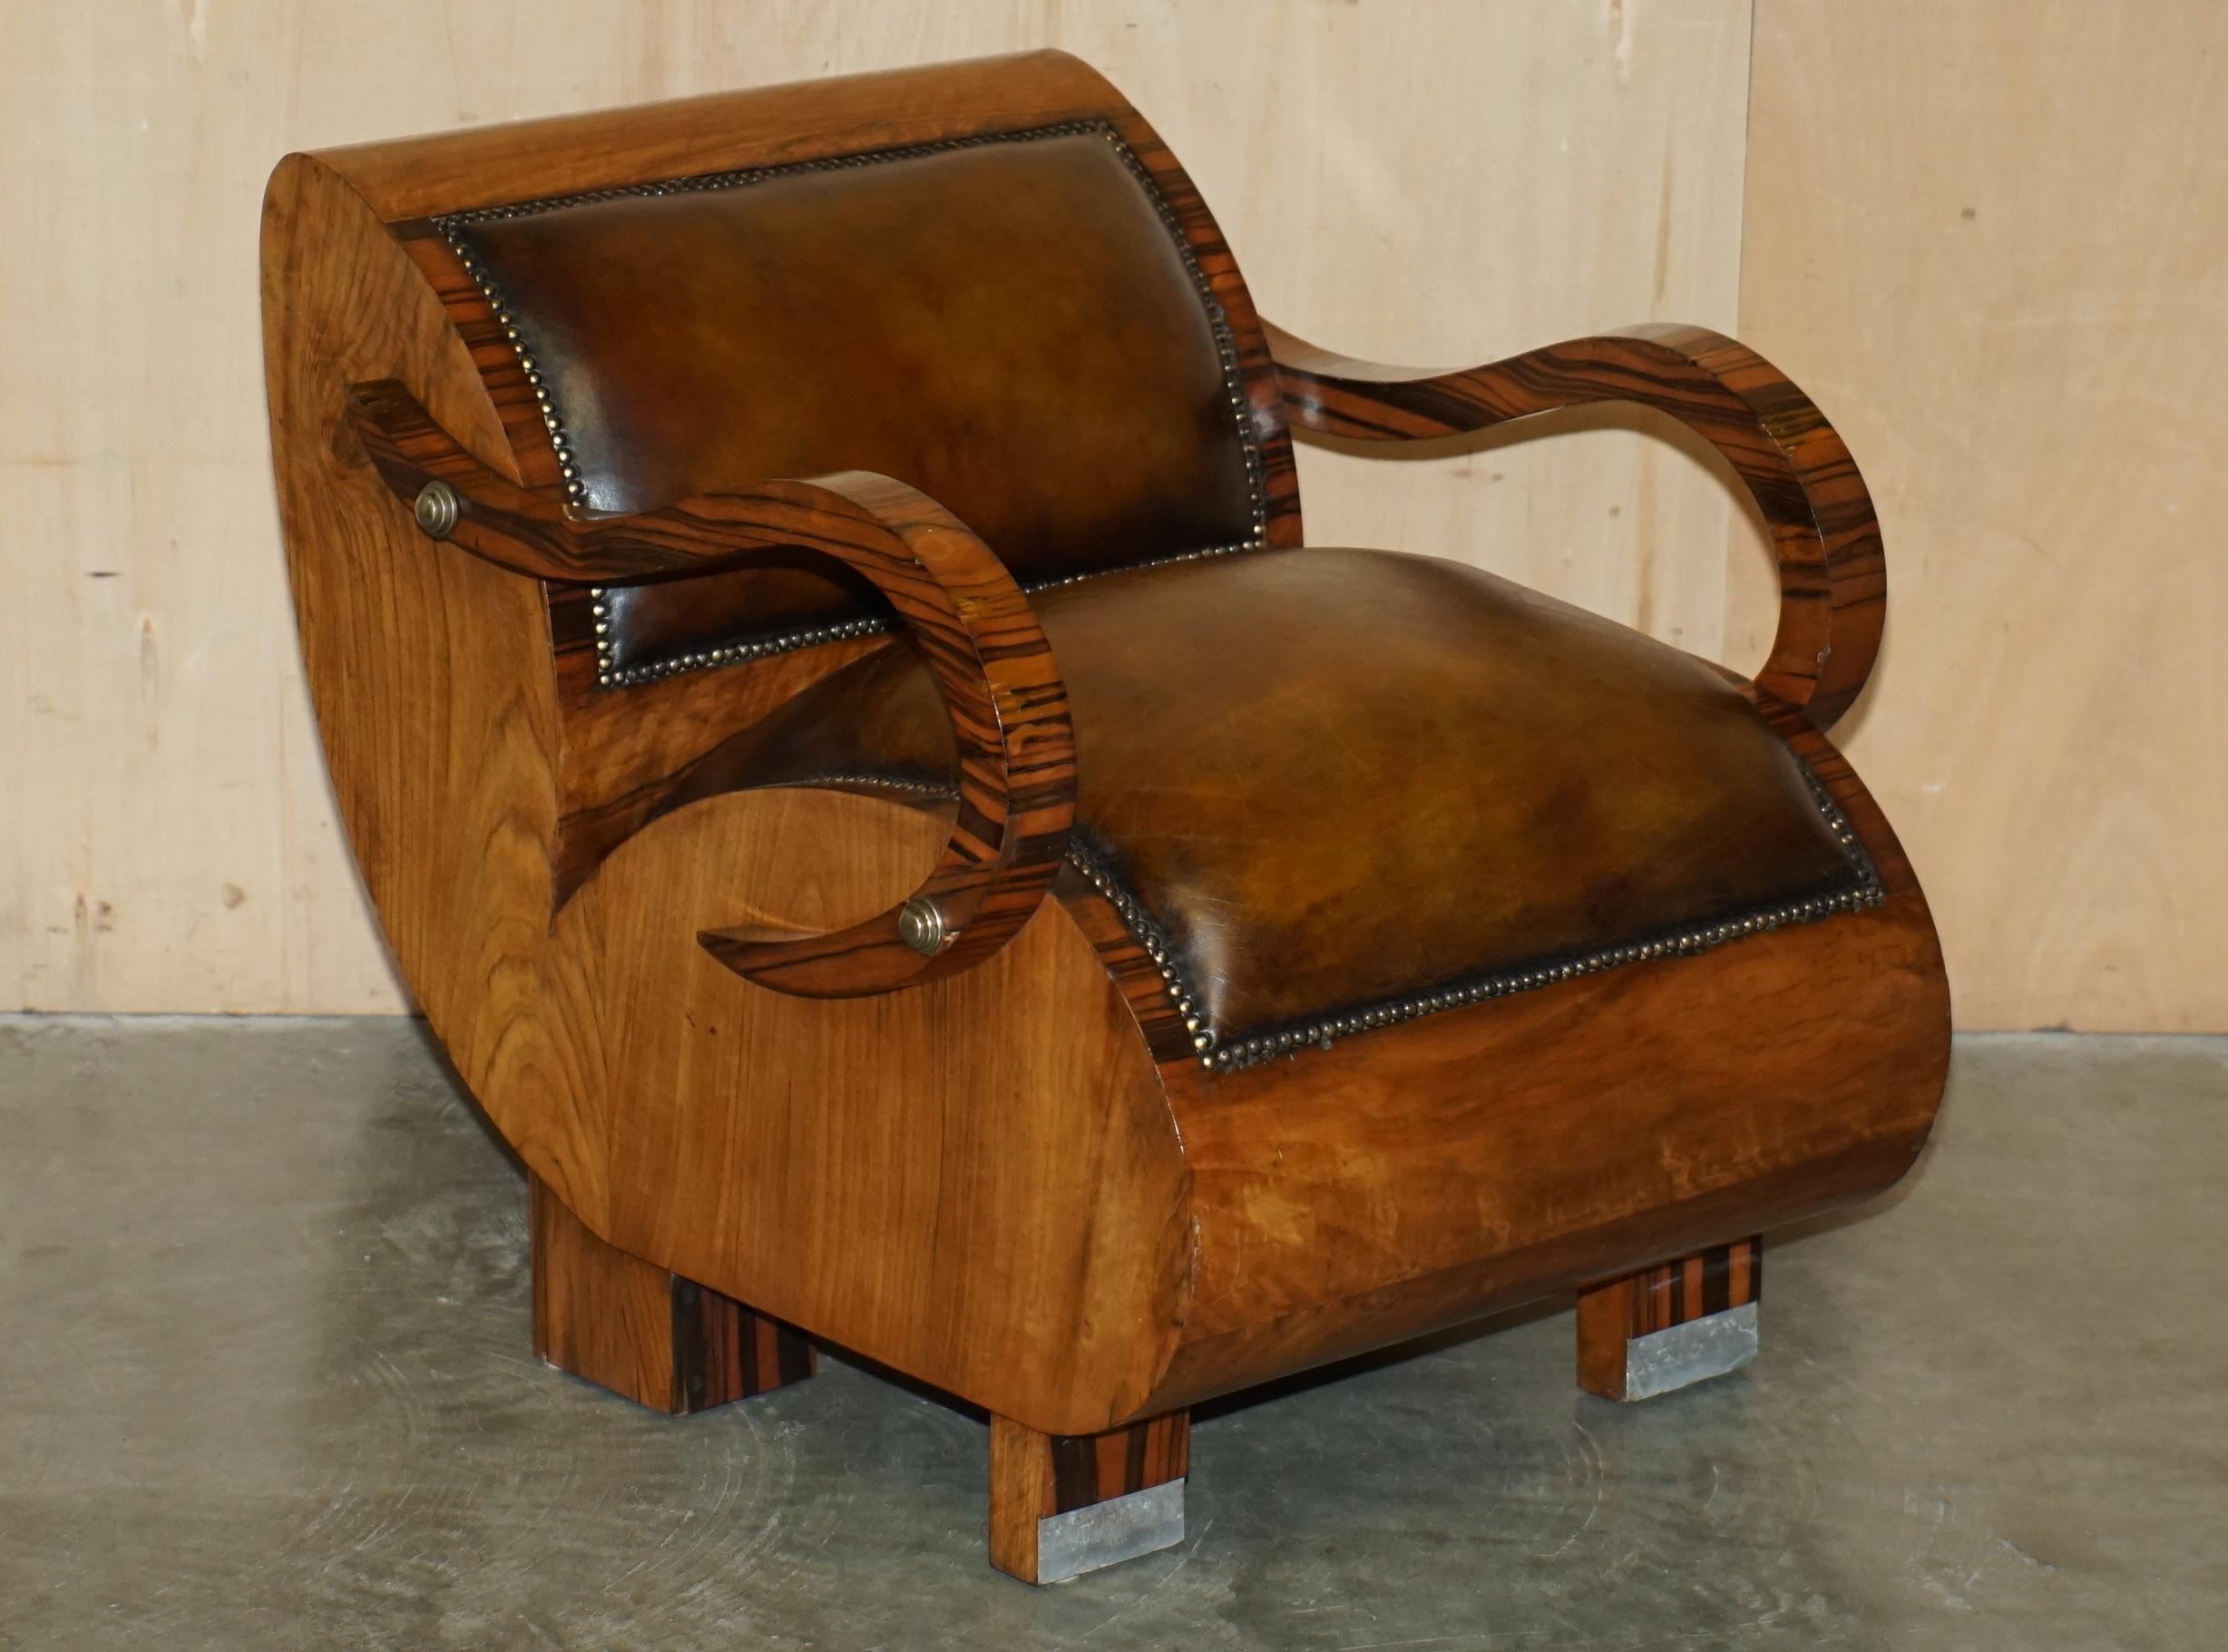 Art Deco FULLY RESTORED ART DECO CIRCA 1920's ZEBRANO BROWN LEATHER SOFA ARMCHAIR SUITE For Sale